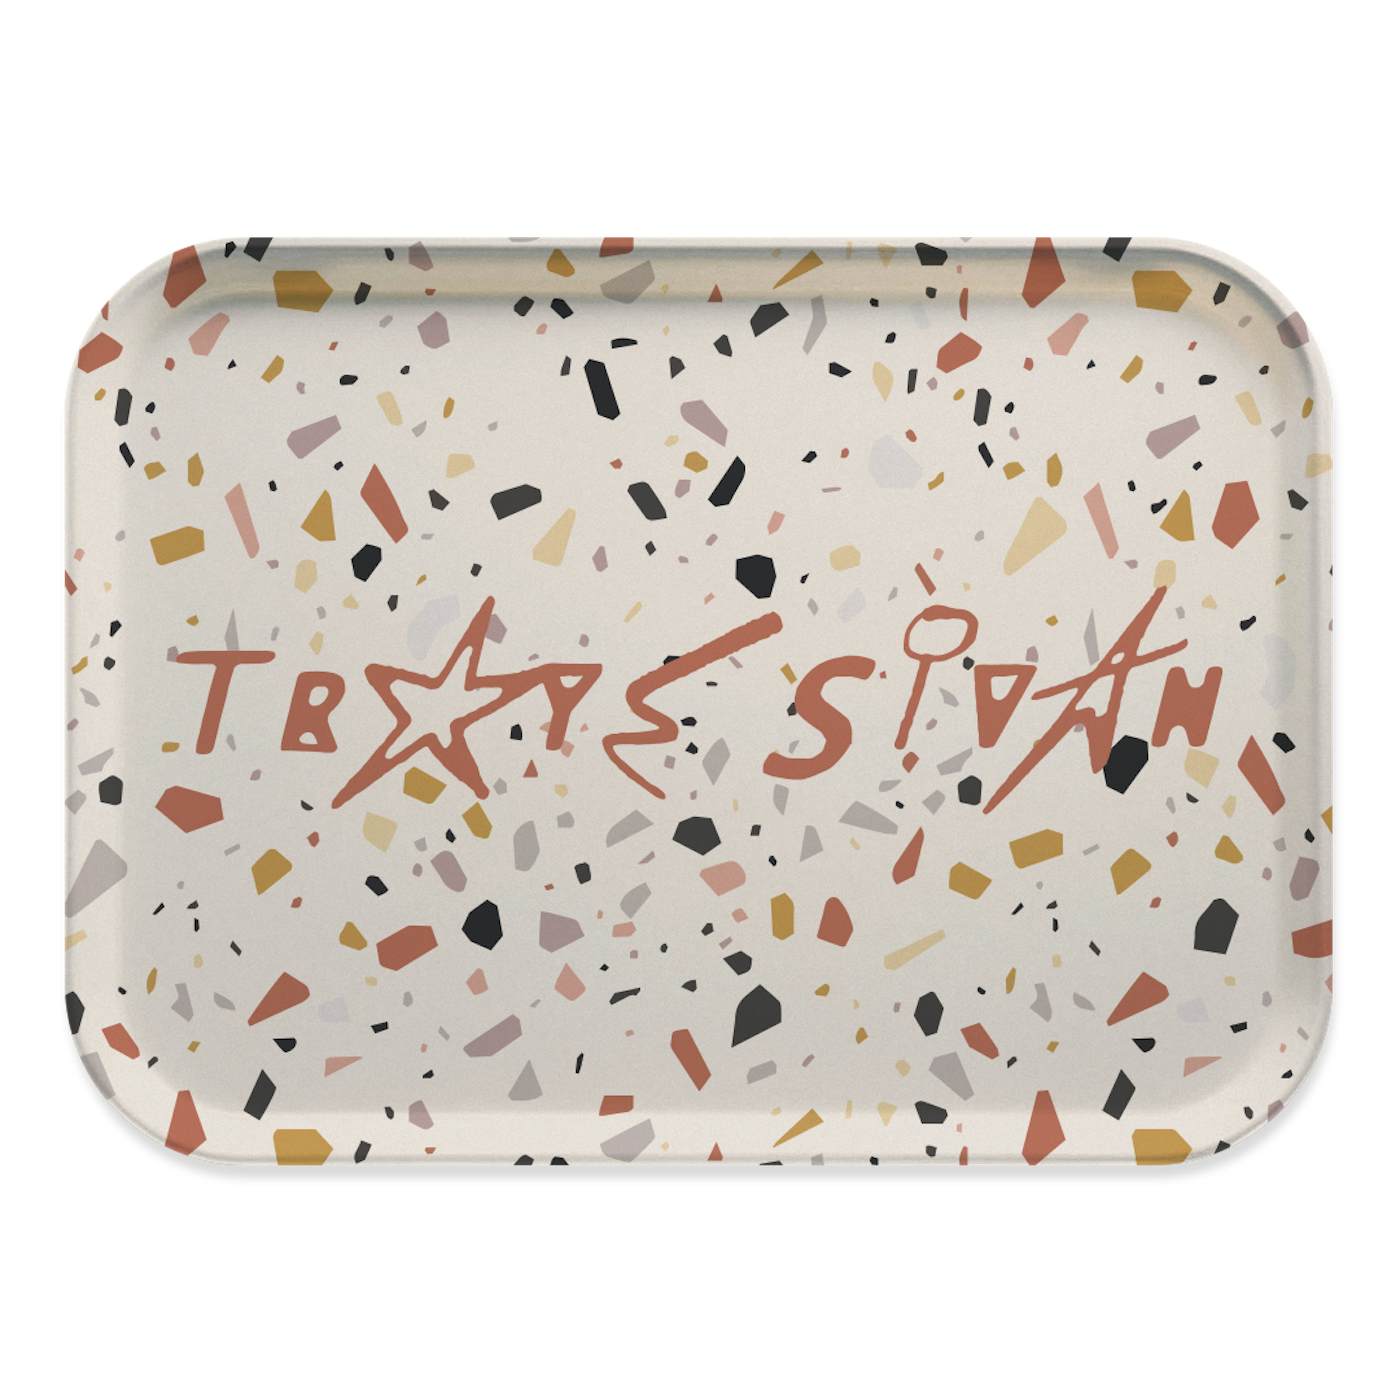 TROYE SIVAN ACCESSORIES TRAY